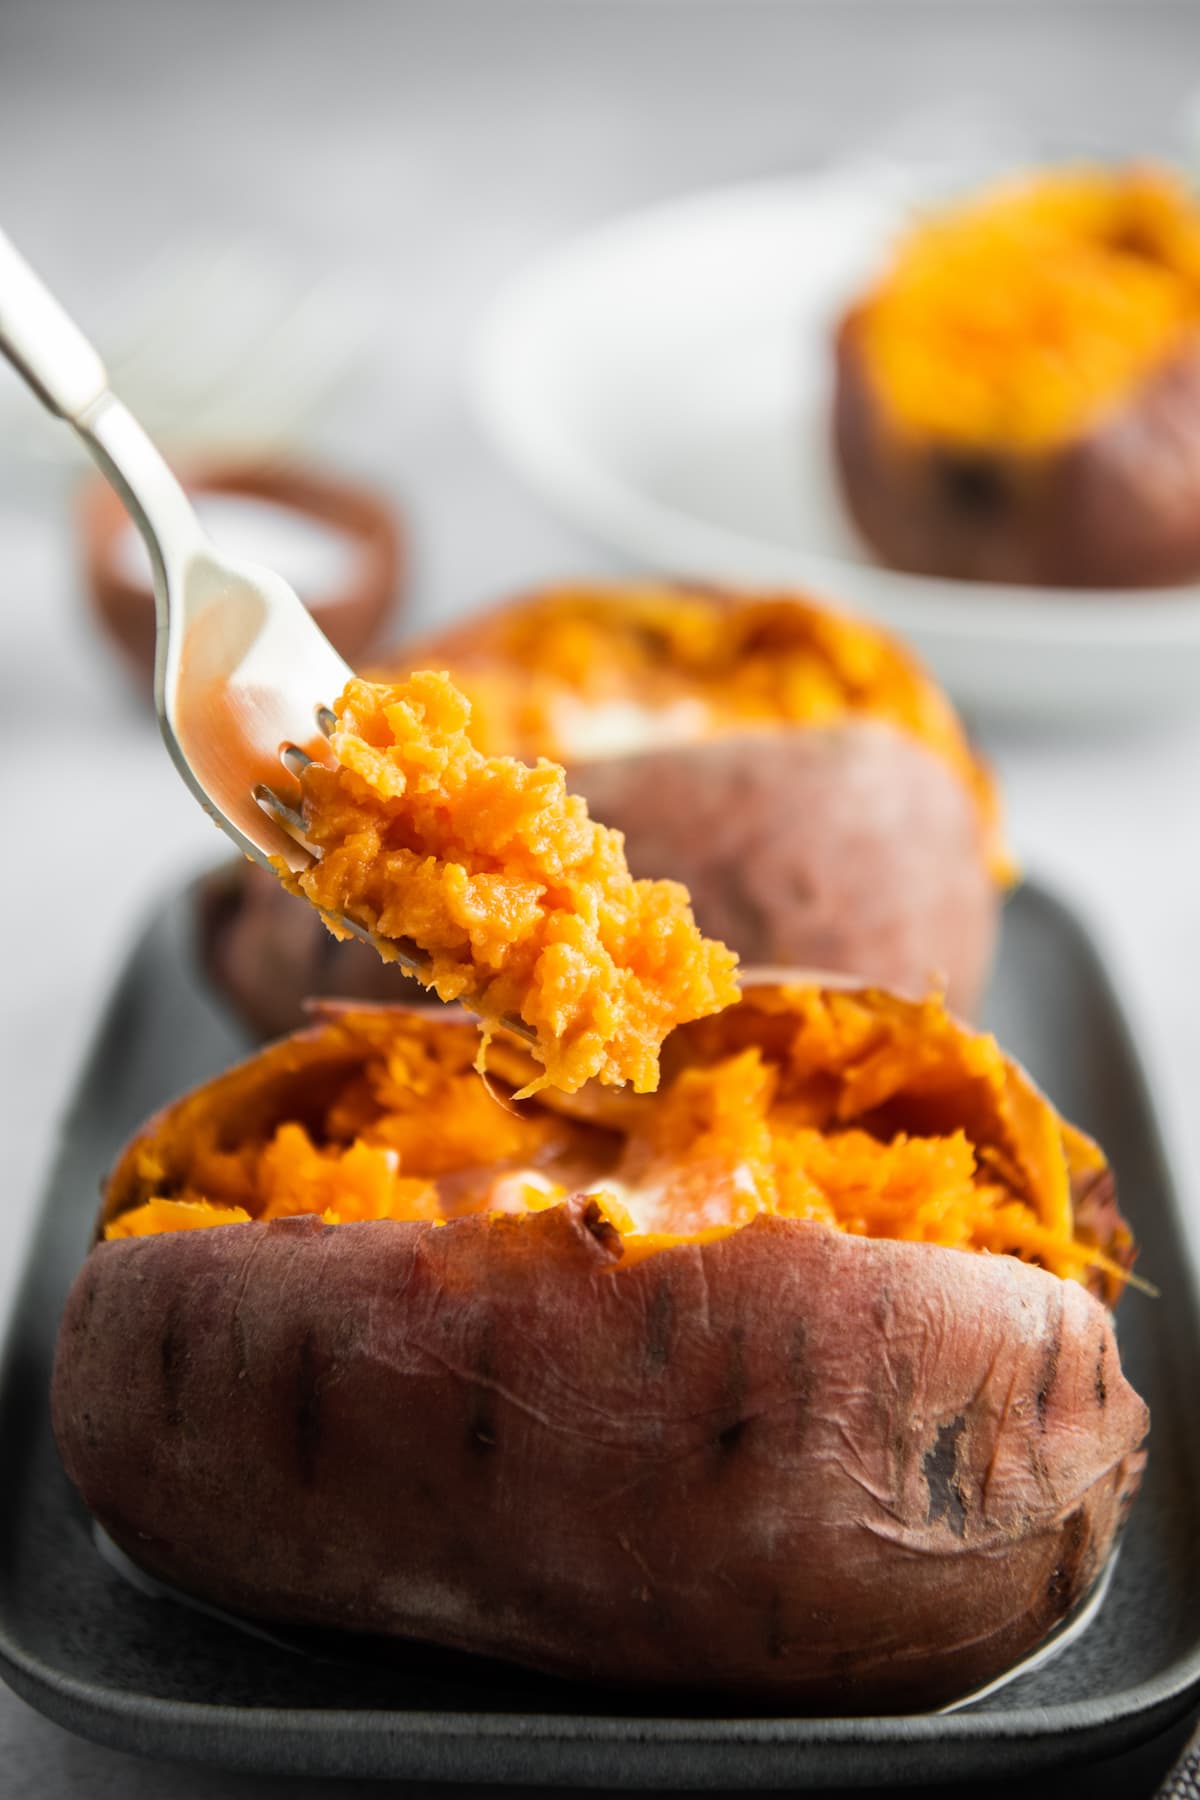 A cooked sweet potato on a plate with a fork scooping out a bite.